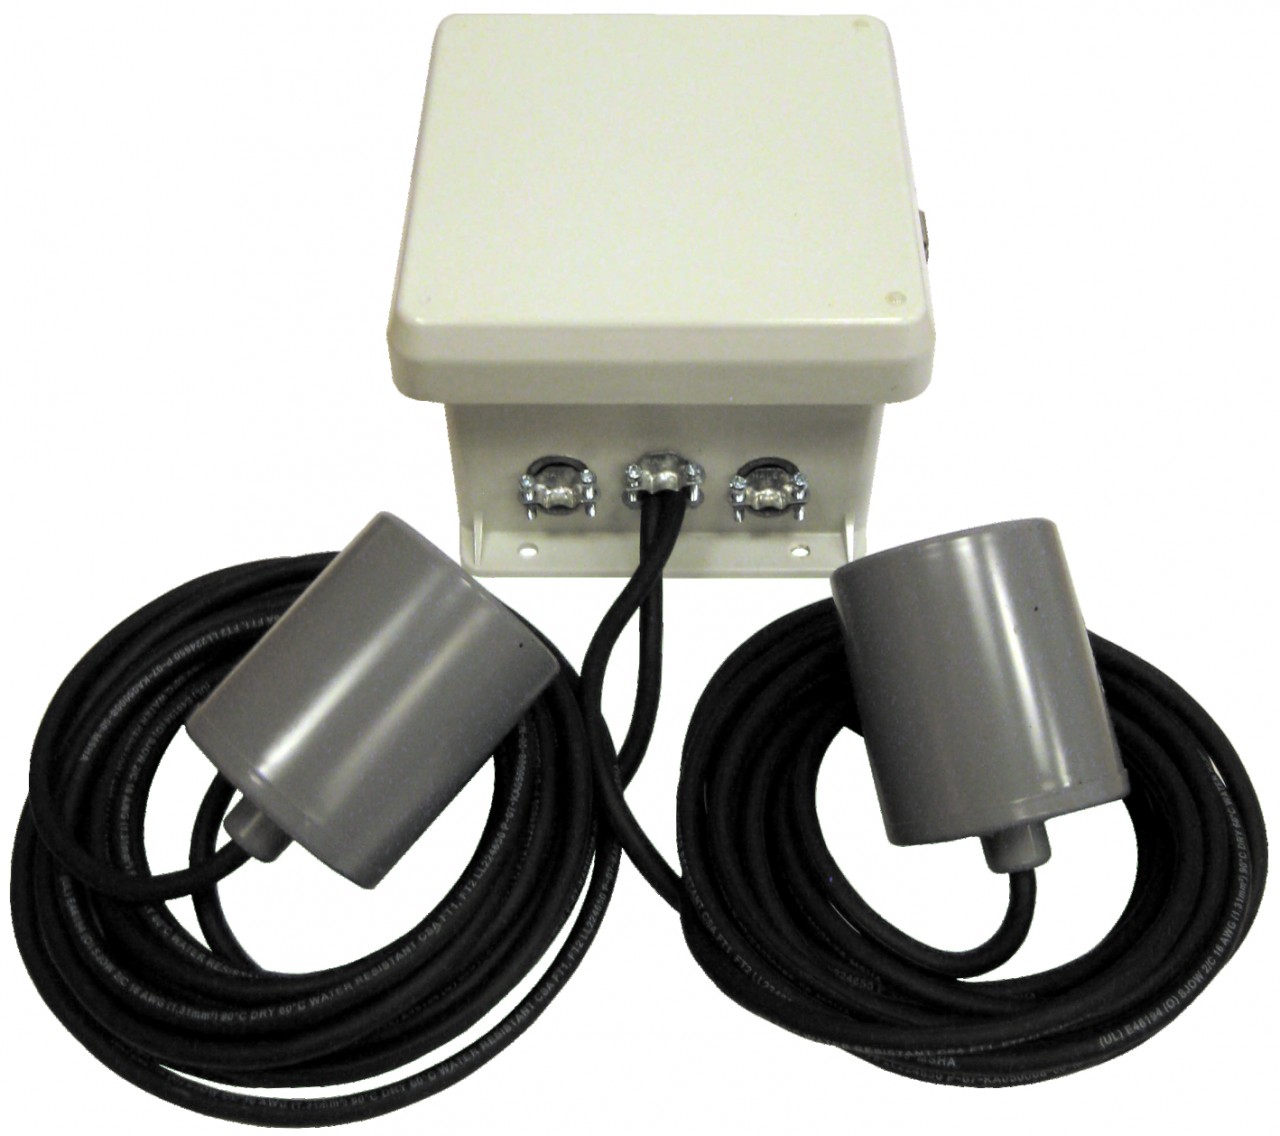 Multiquip CB3 Control Box with 2 Float Switches